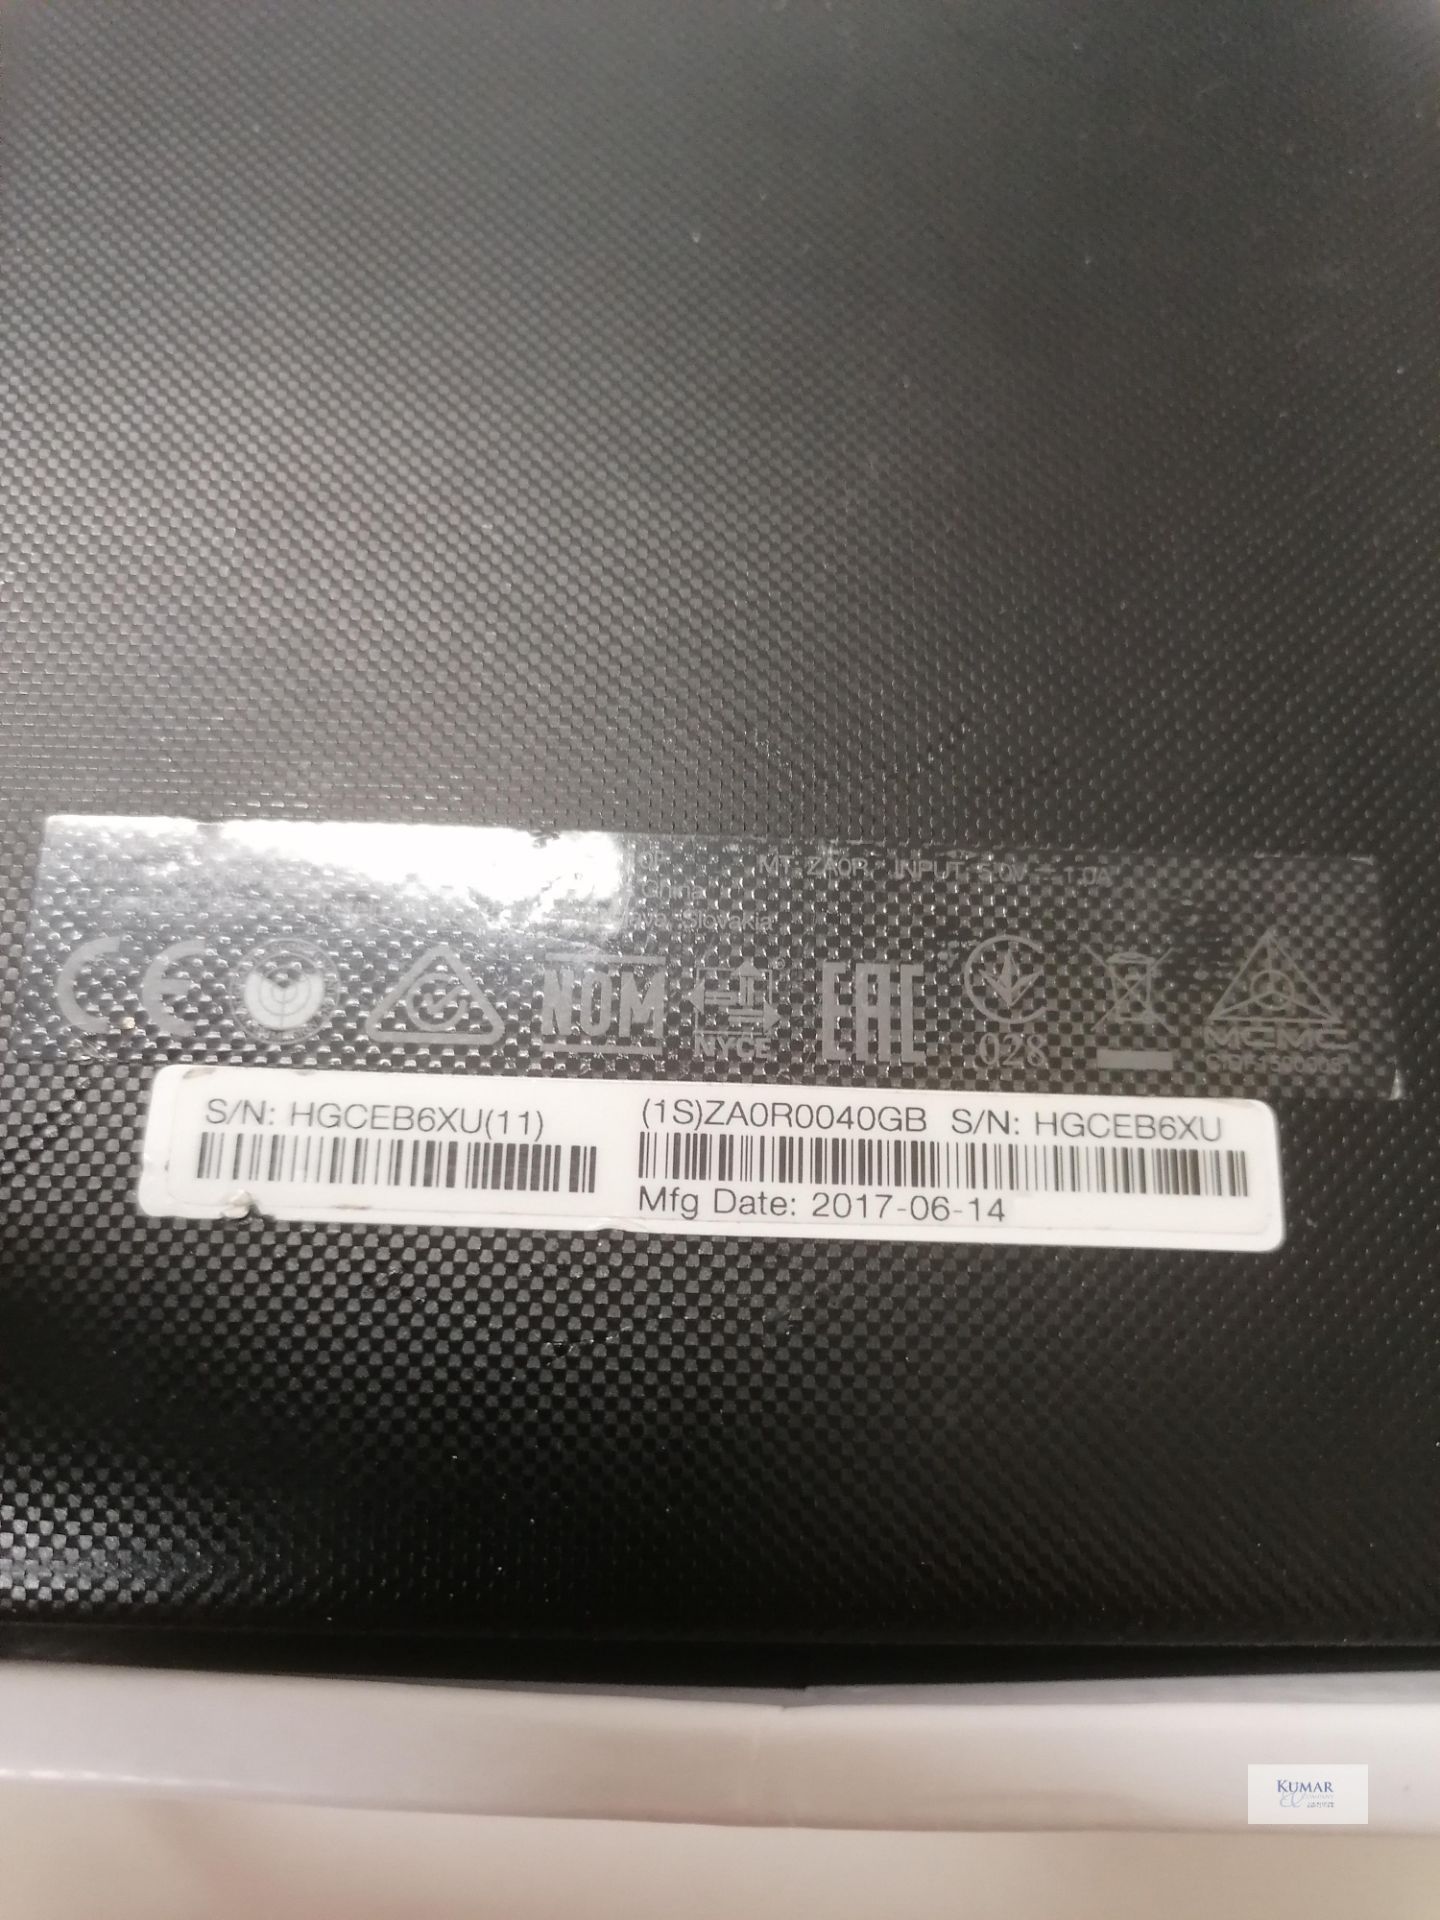 Lenovo TB3-710F 7" 16GB Table Man 14 06 2017 Updated 21 10 2020 In box,cable and charger - Image 6 of 6